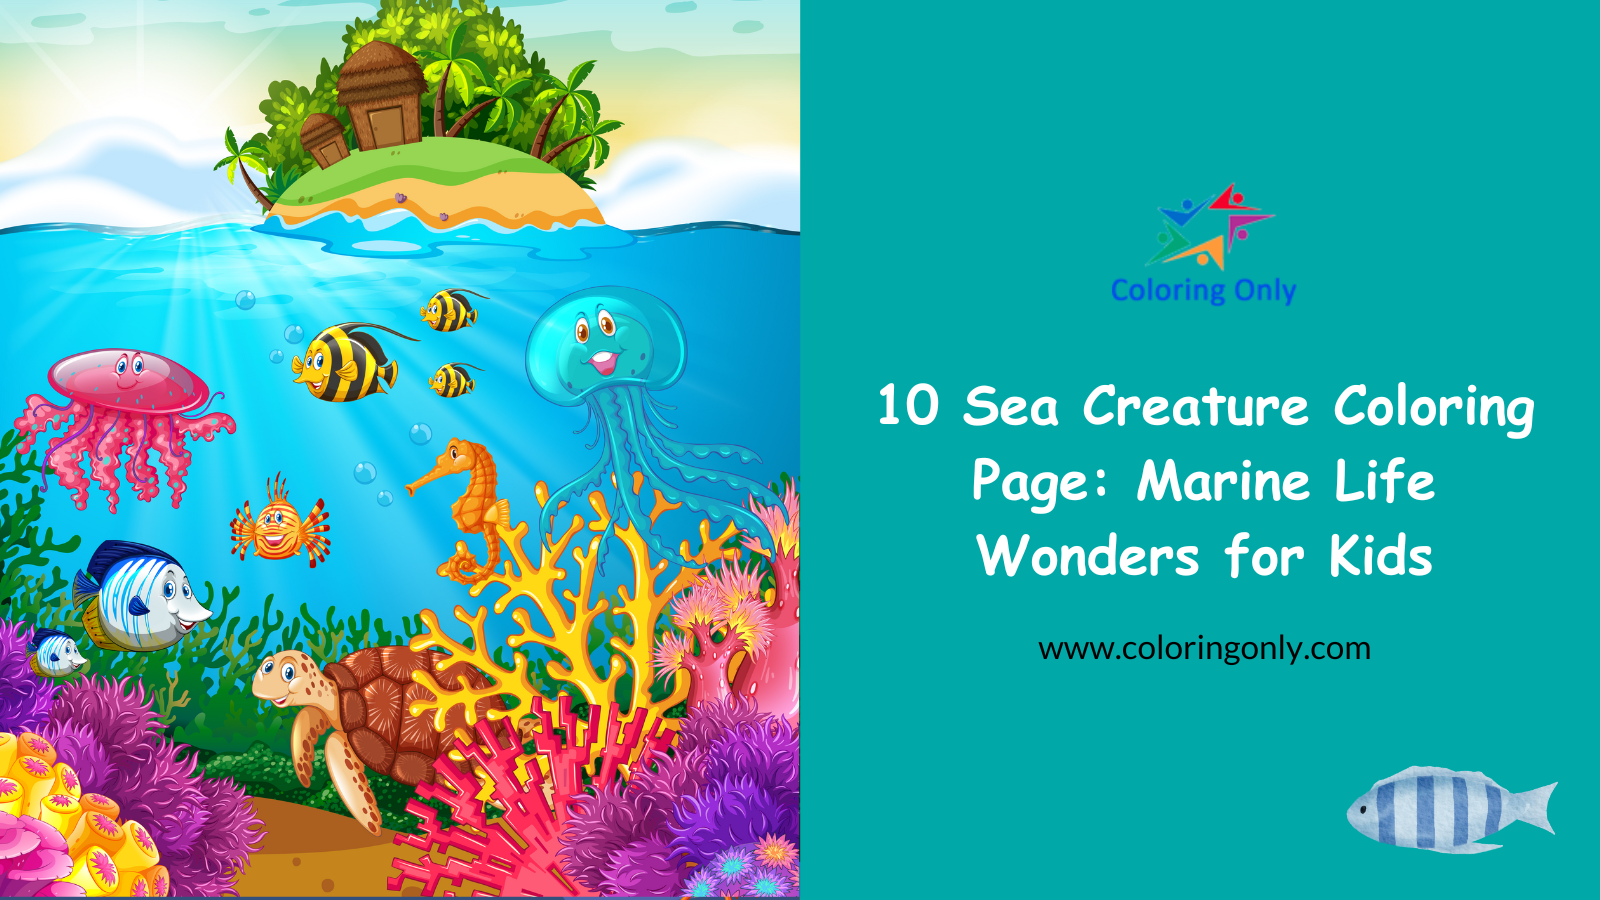 10 Sea Creature Coloring Page: Marine Life Wonders for Kids